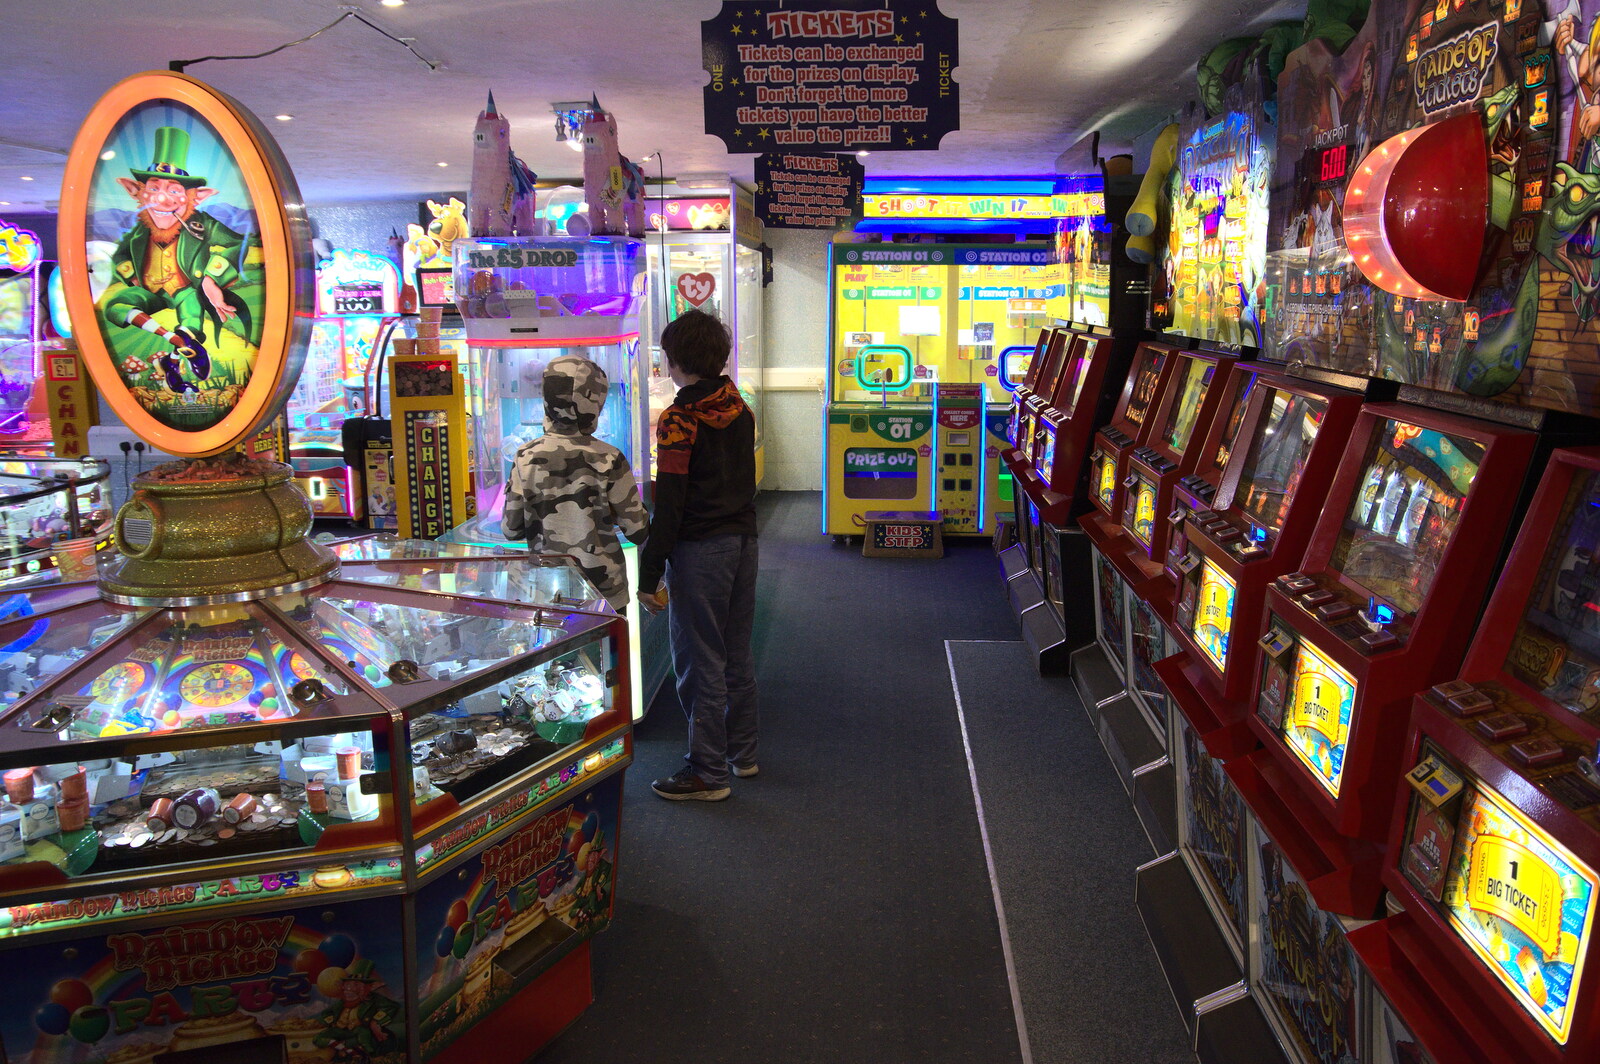 The boys are in the amusement arcade from On the Beach at Sea Palling, Norfolk - 8th May 2022